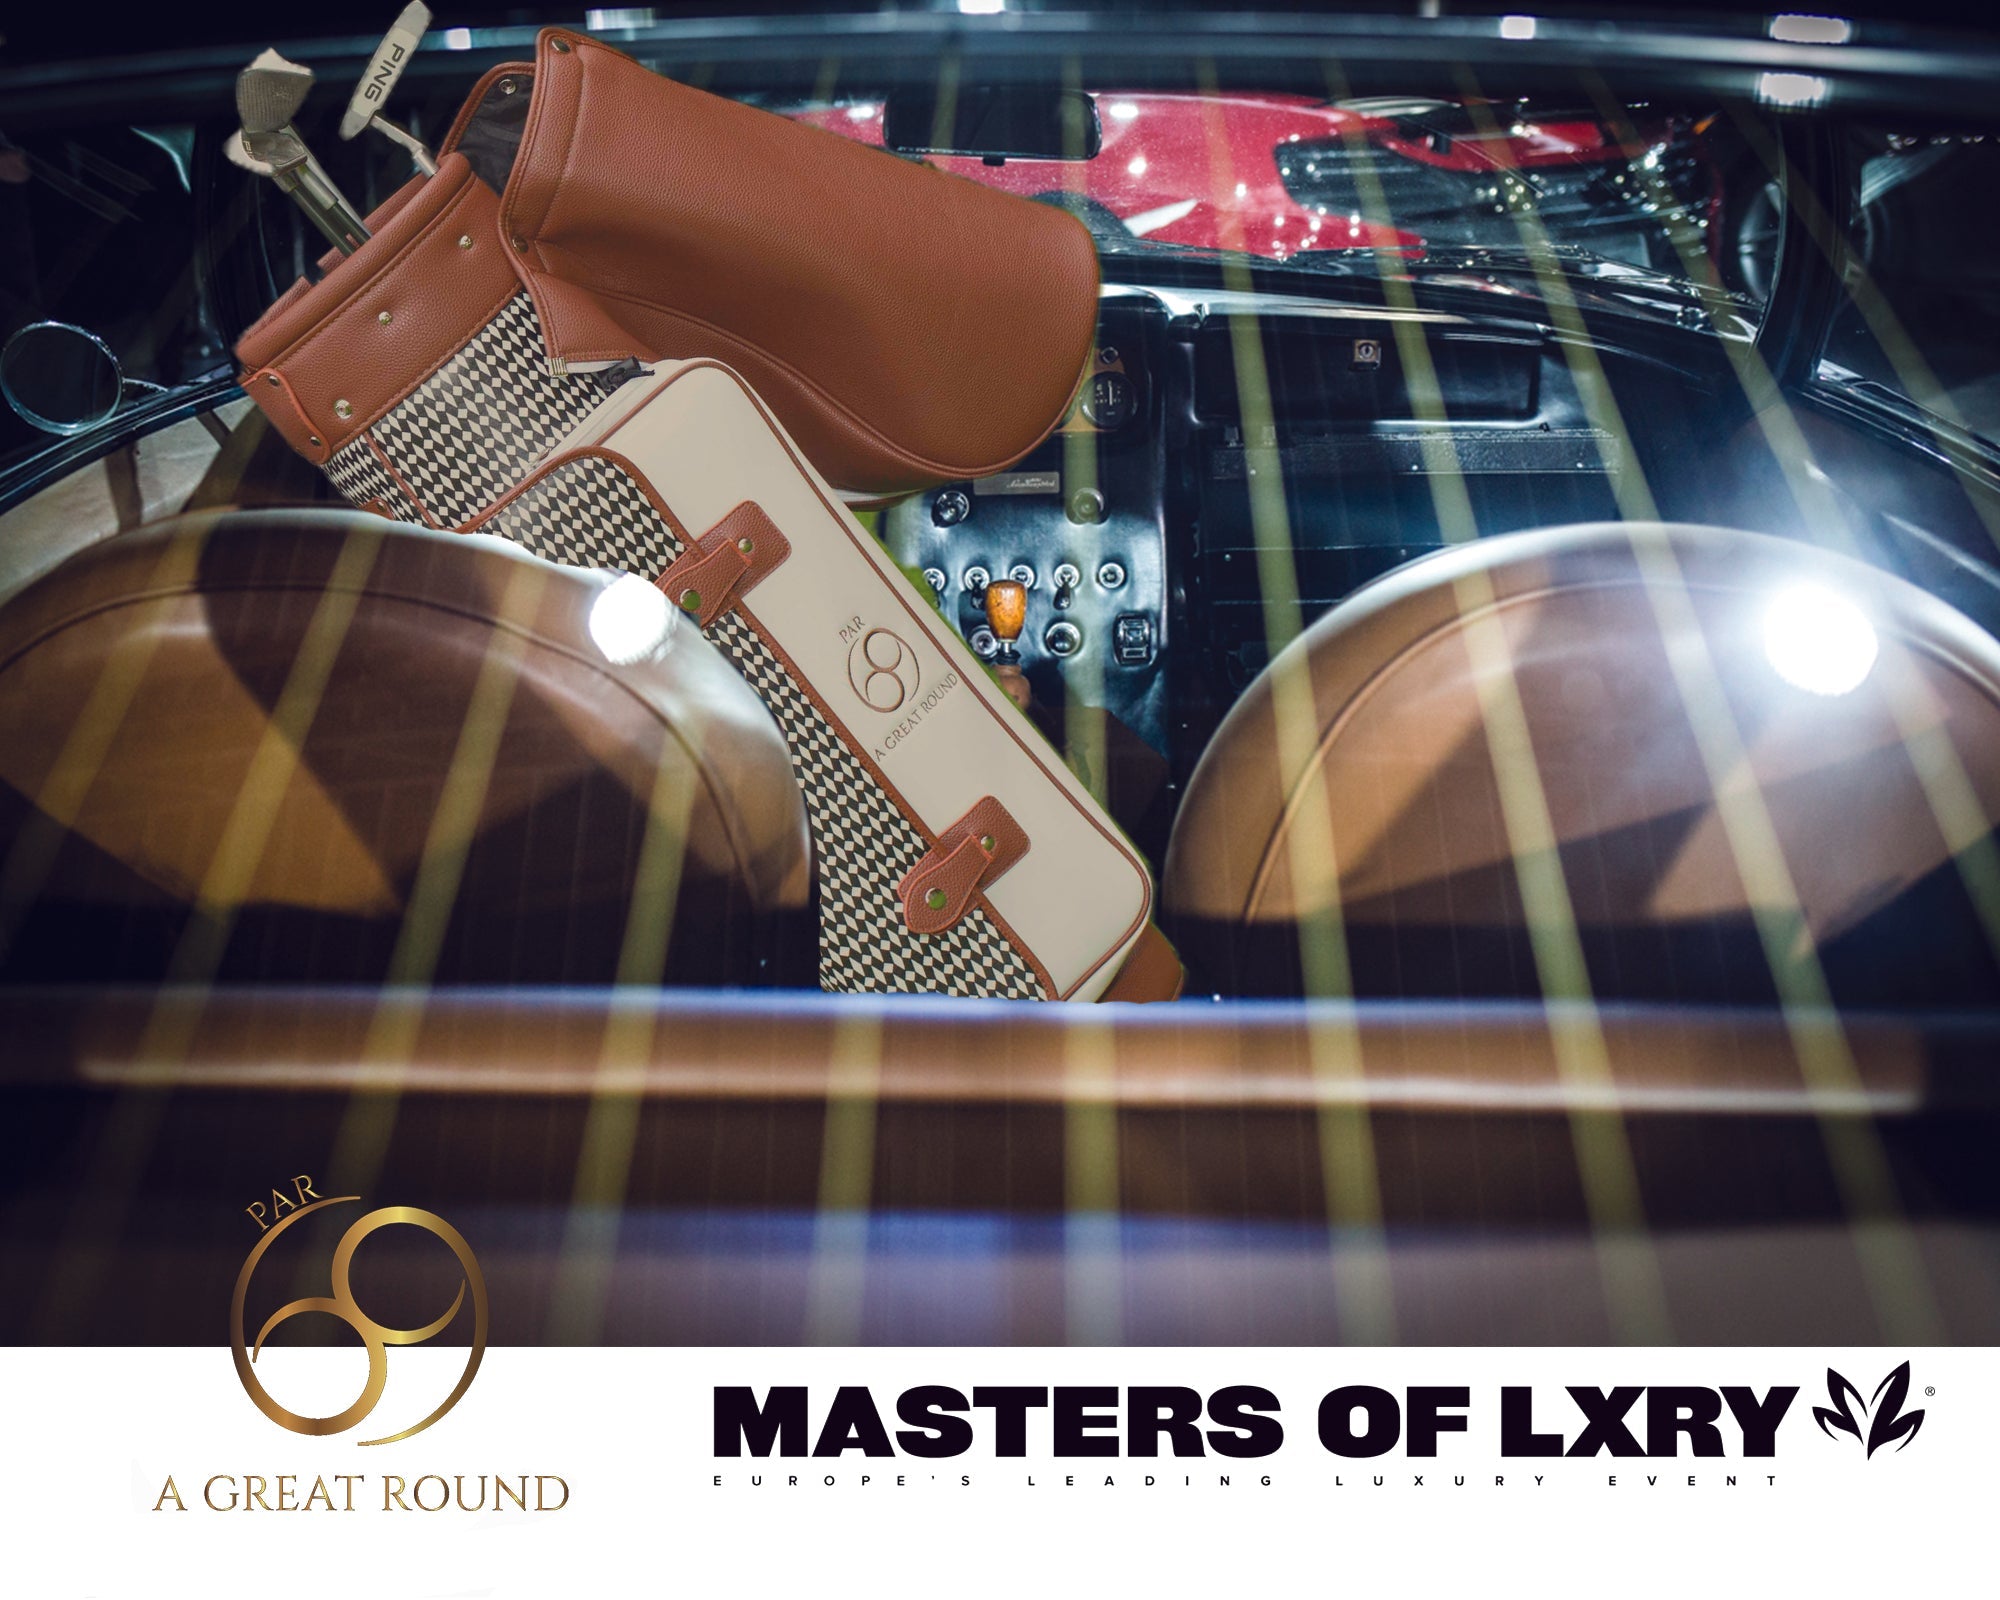 PAR69 present at this year's Masters of LXRY fair!